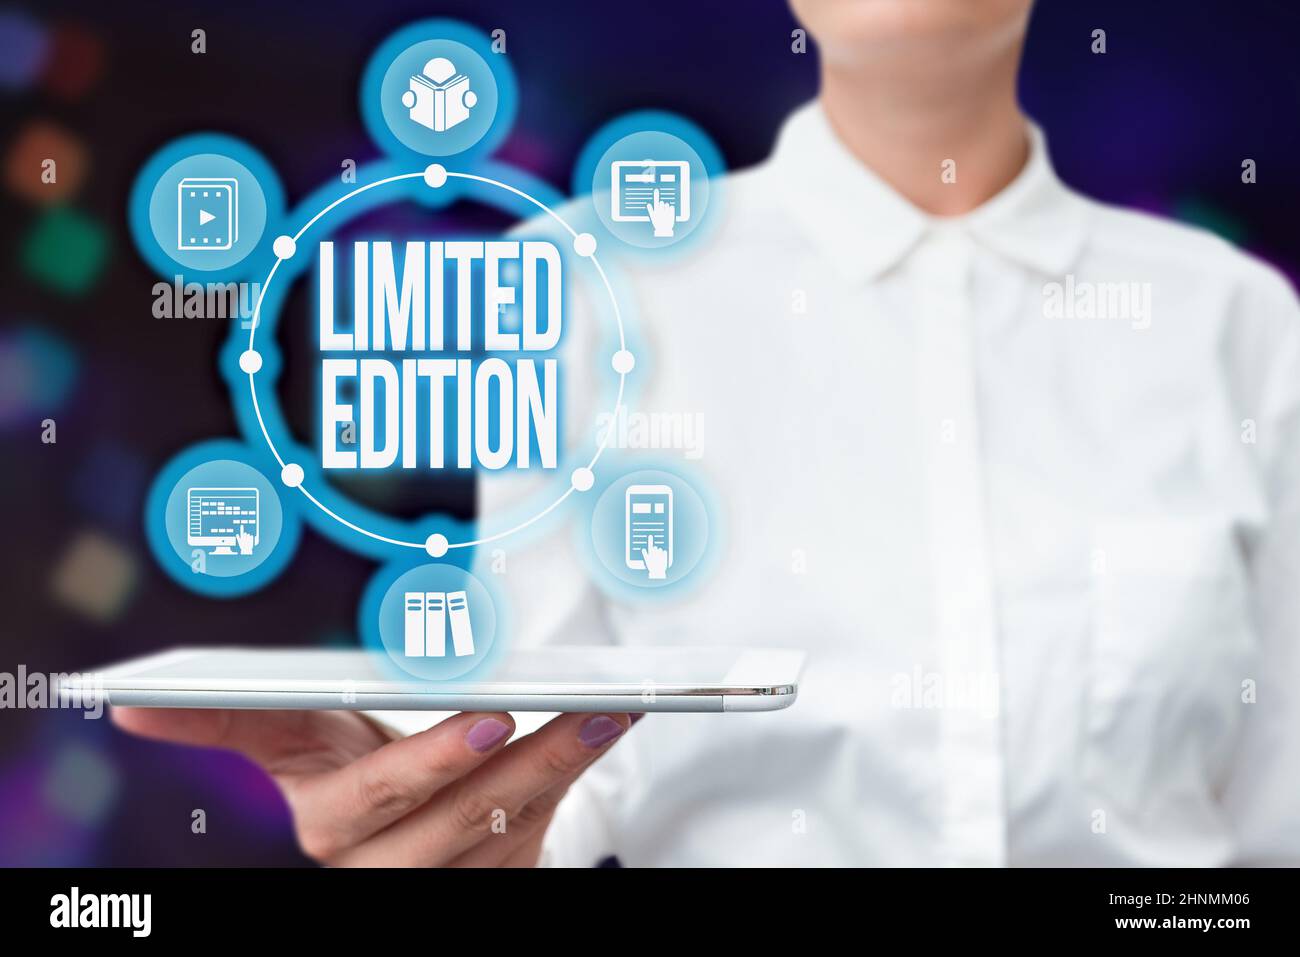 Conceptual caption Limited Edition, Word for Work of something which is only produced in small numbers Lady Uniform Standing Tablet Hand Presenting Vi Stock Photo